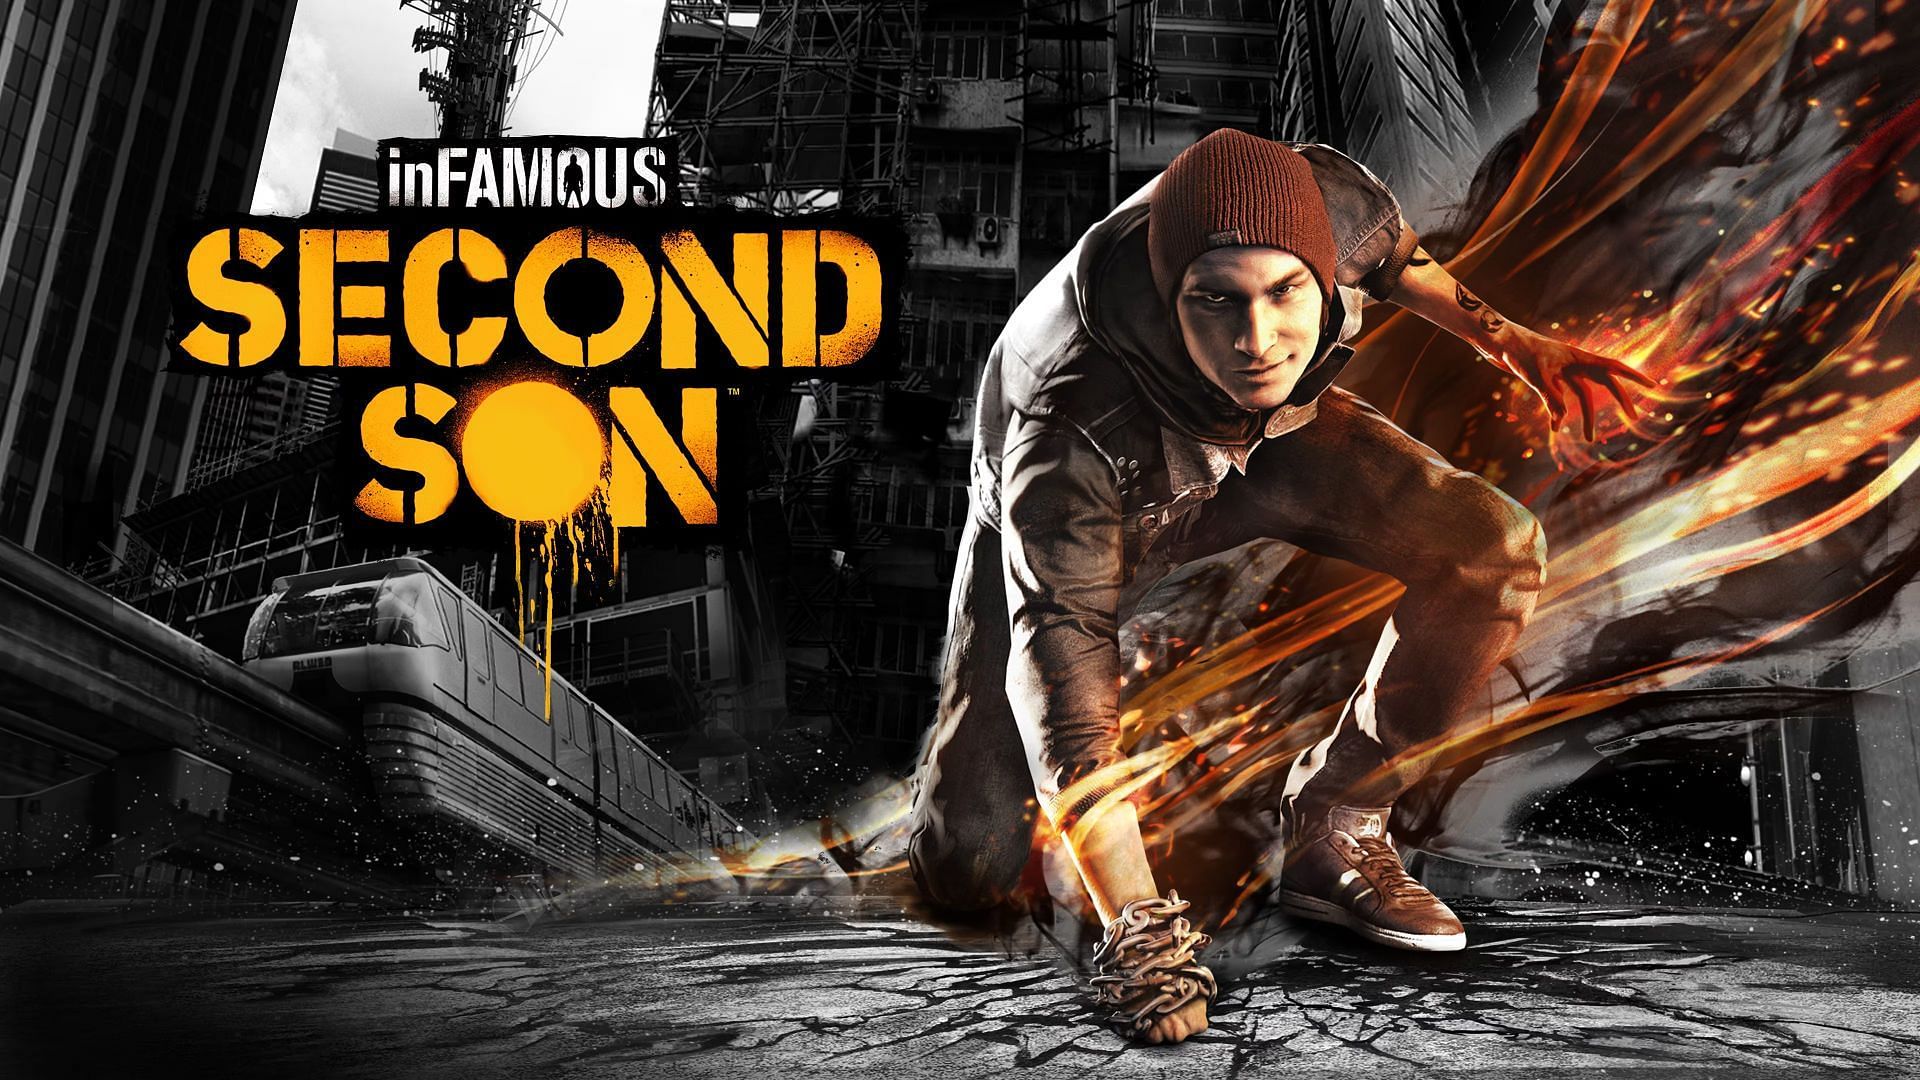 Infamous Second Son received a next-gen patch for the PS5. (Image via Sucker Punch Productions)